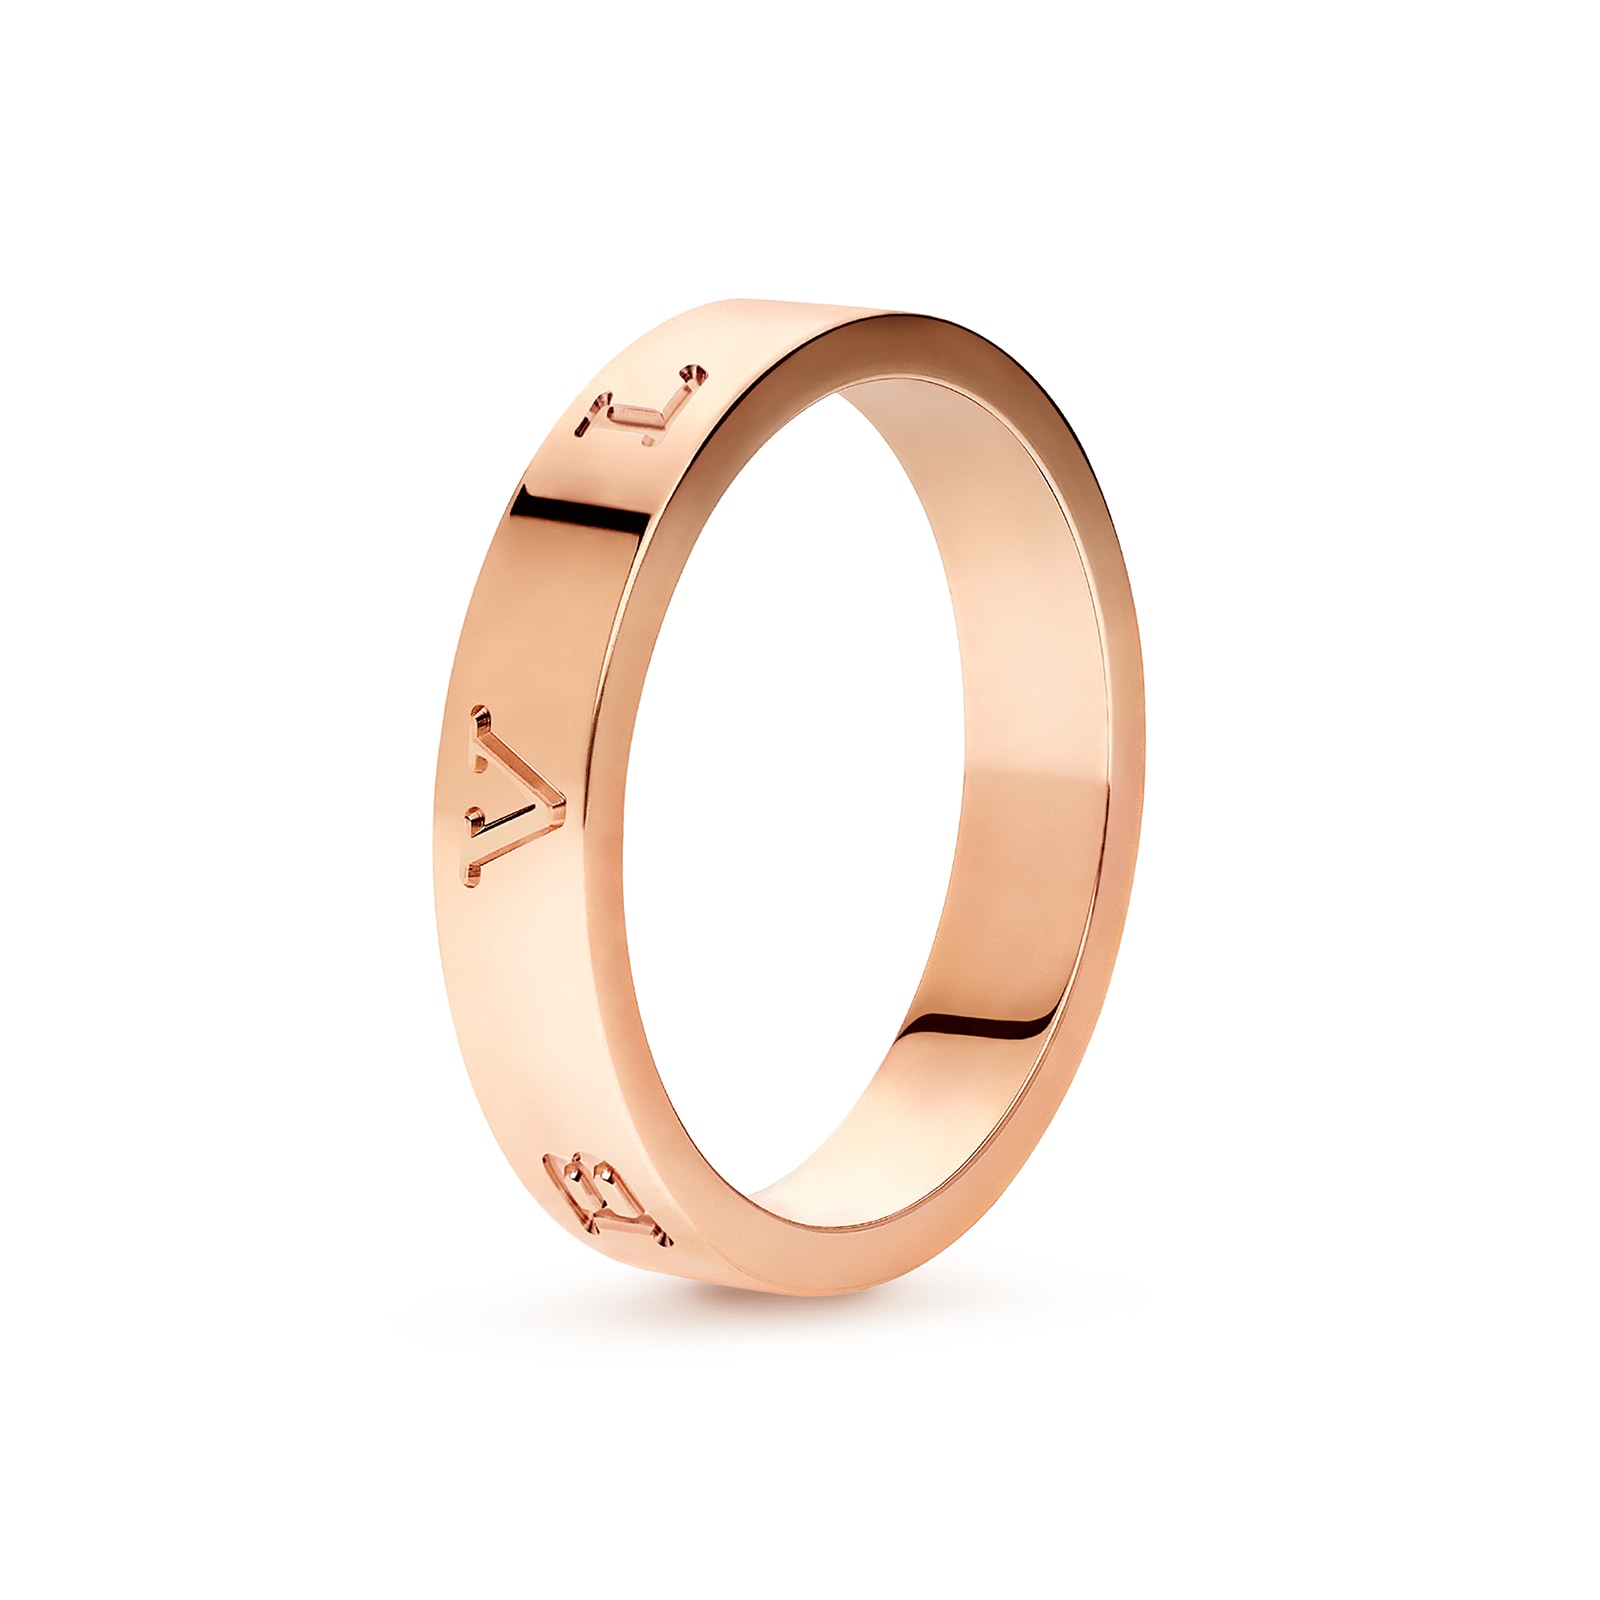 The most romantic of the Monogram Fusion Louis Vuitton rings